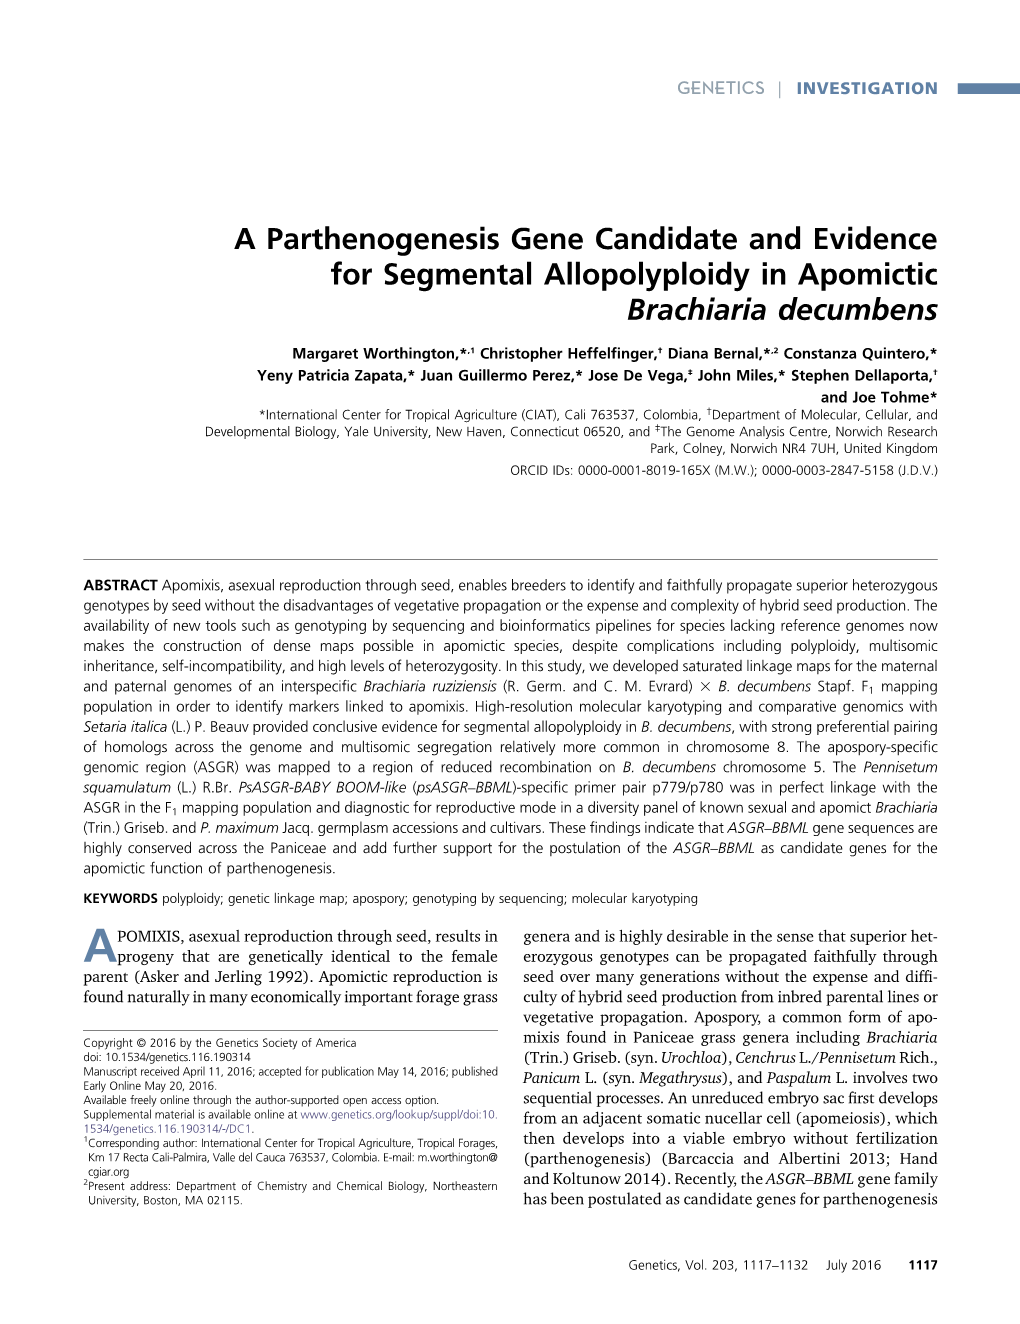 A Parthenogenesis Gene Candidate and Evidence for Segmental Allopolyploidy in Apomictic Brachiaria Decumbens